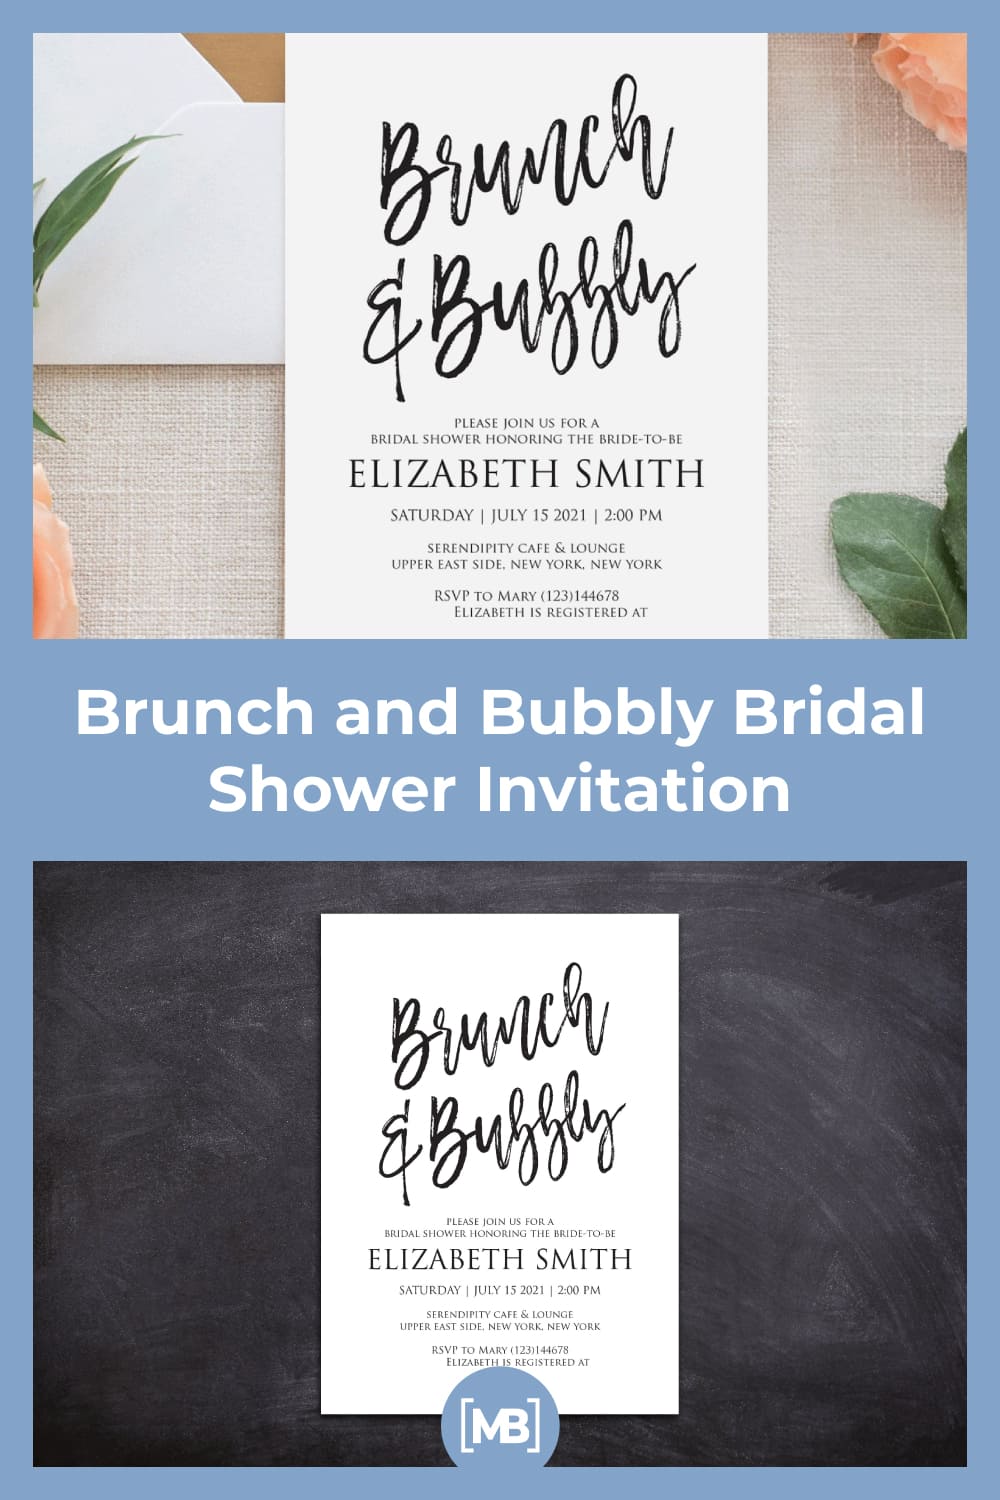 Brunch and bubbly bridal shower invitation.